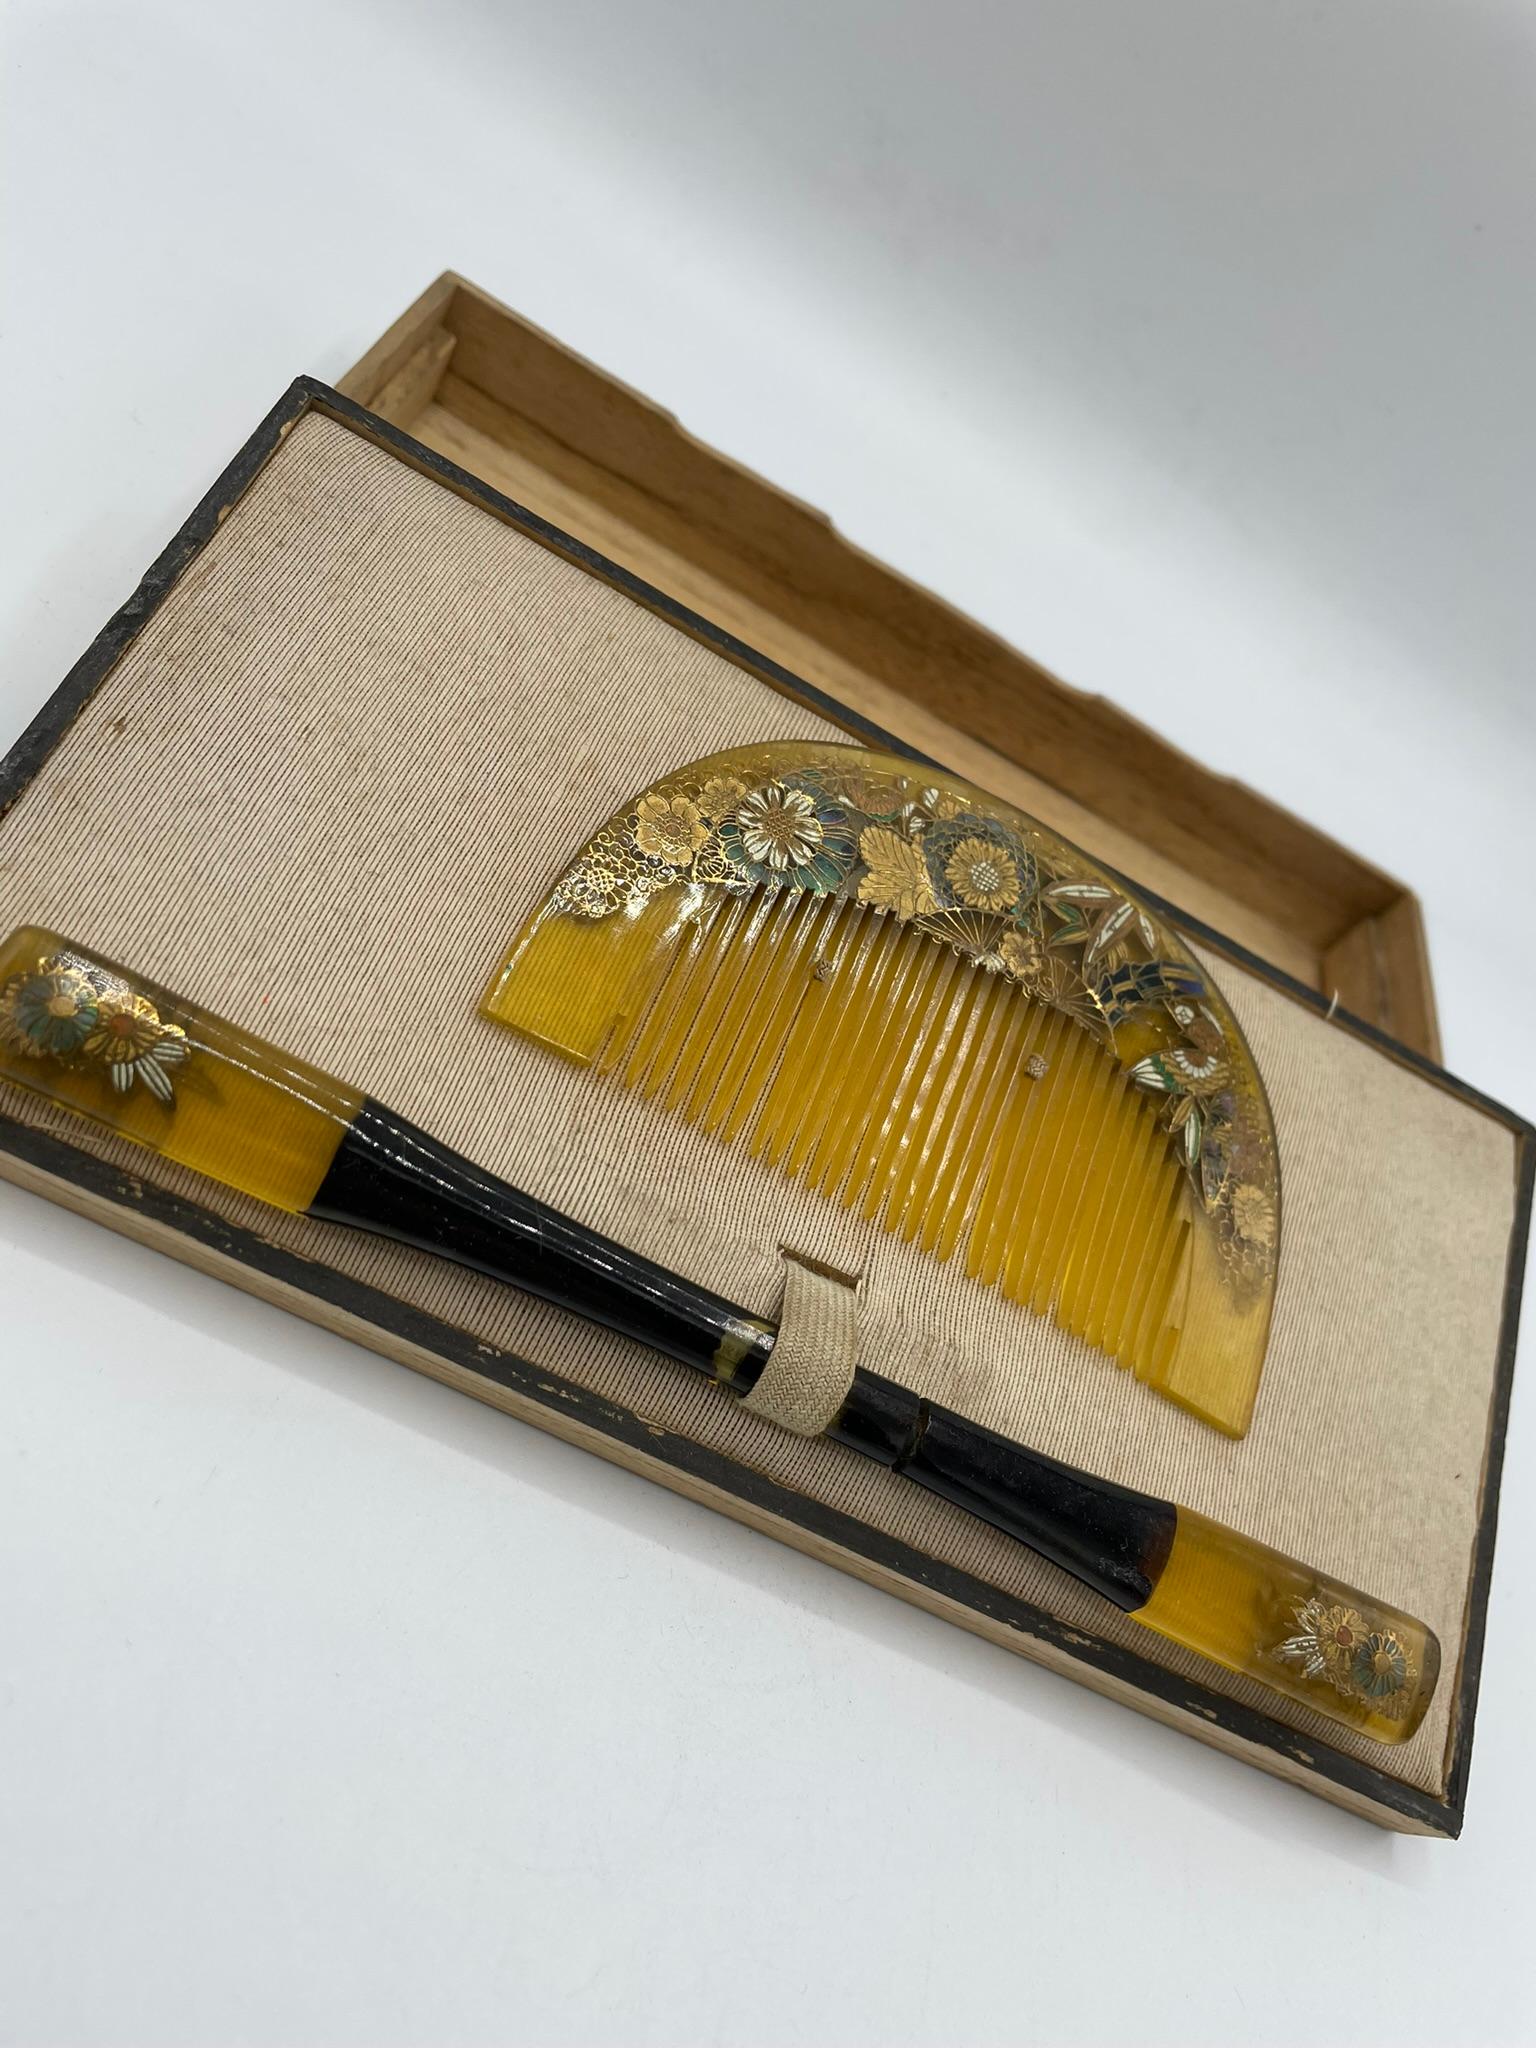 This is a Japanese comb and Kanzashi with a box.
Kanzashi is a hair ornament used in traditional Japanese hairstyles. 
These hair ornaments are made in about 1920s in Taisho era.

Two-piece stick-shaped kanzashi featuring a design on each end,